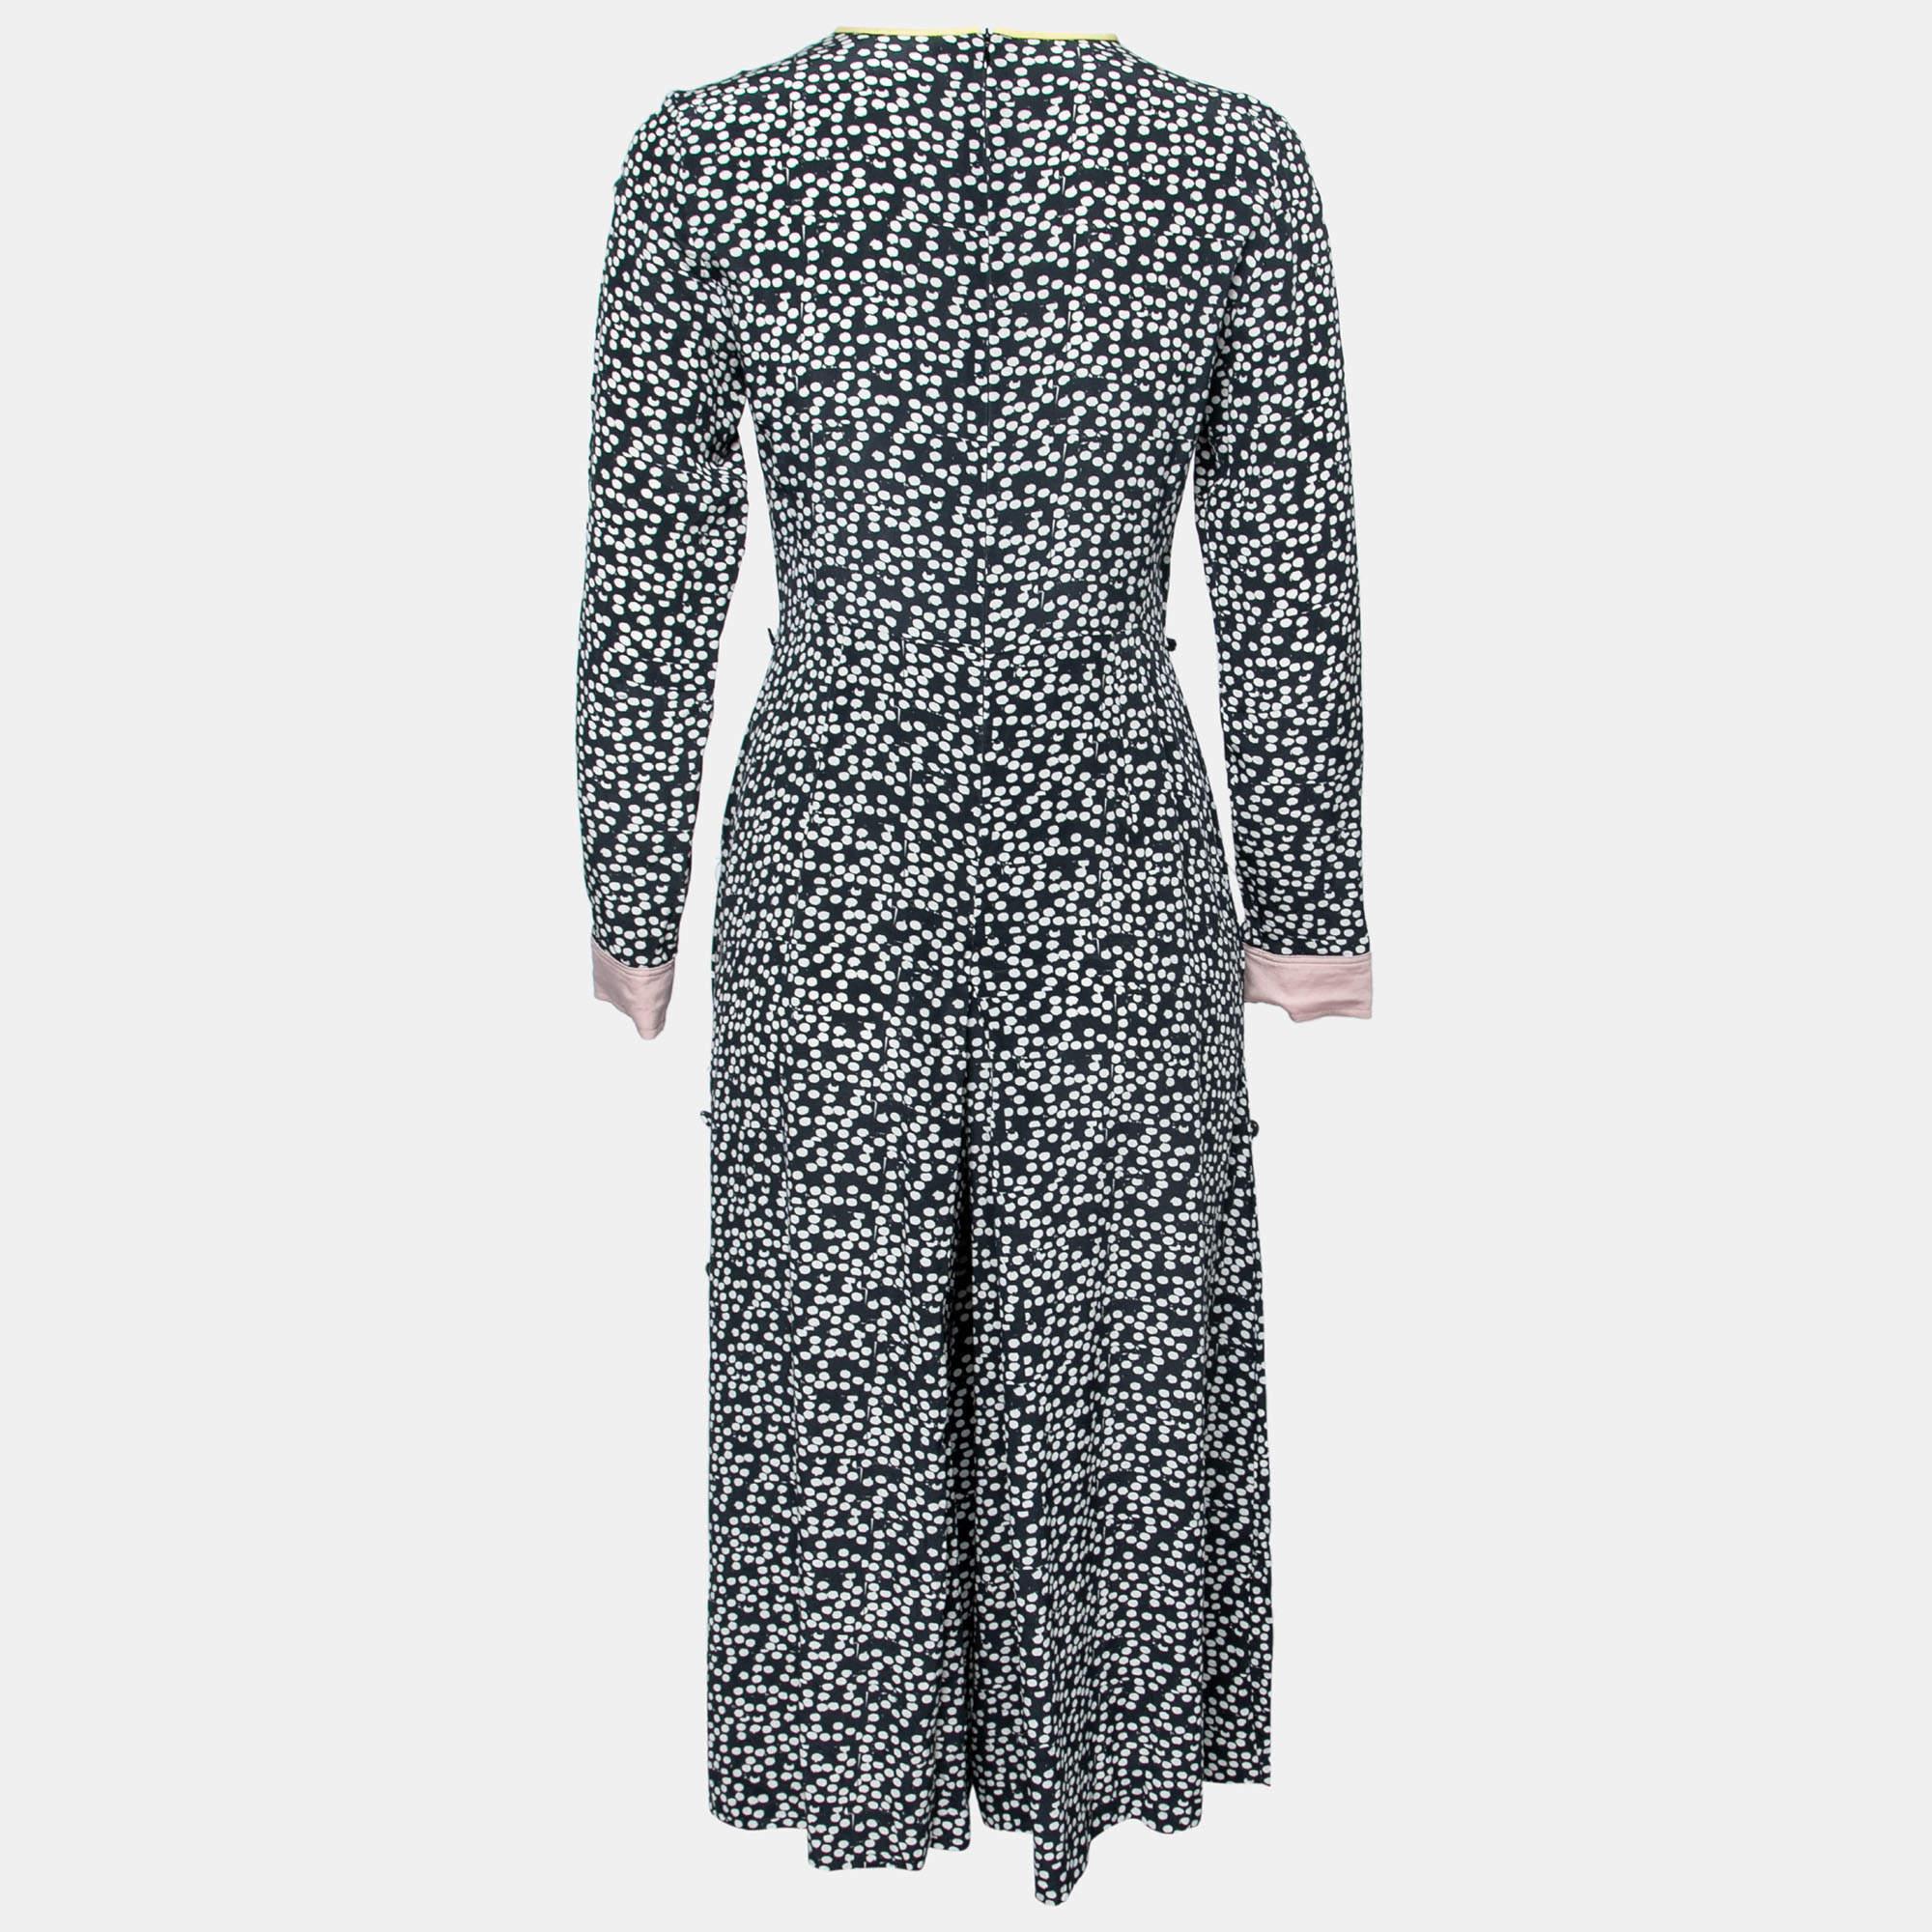 This Max Mara jumpsuit will be an elegant addition to your closet. Crafted skillfully from silk and featuring a polka dot print, the long-sleeved creation has a navy blue shade that will match well with minimal accessories. It is complete with a zip